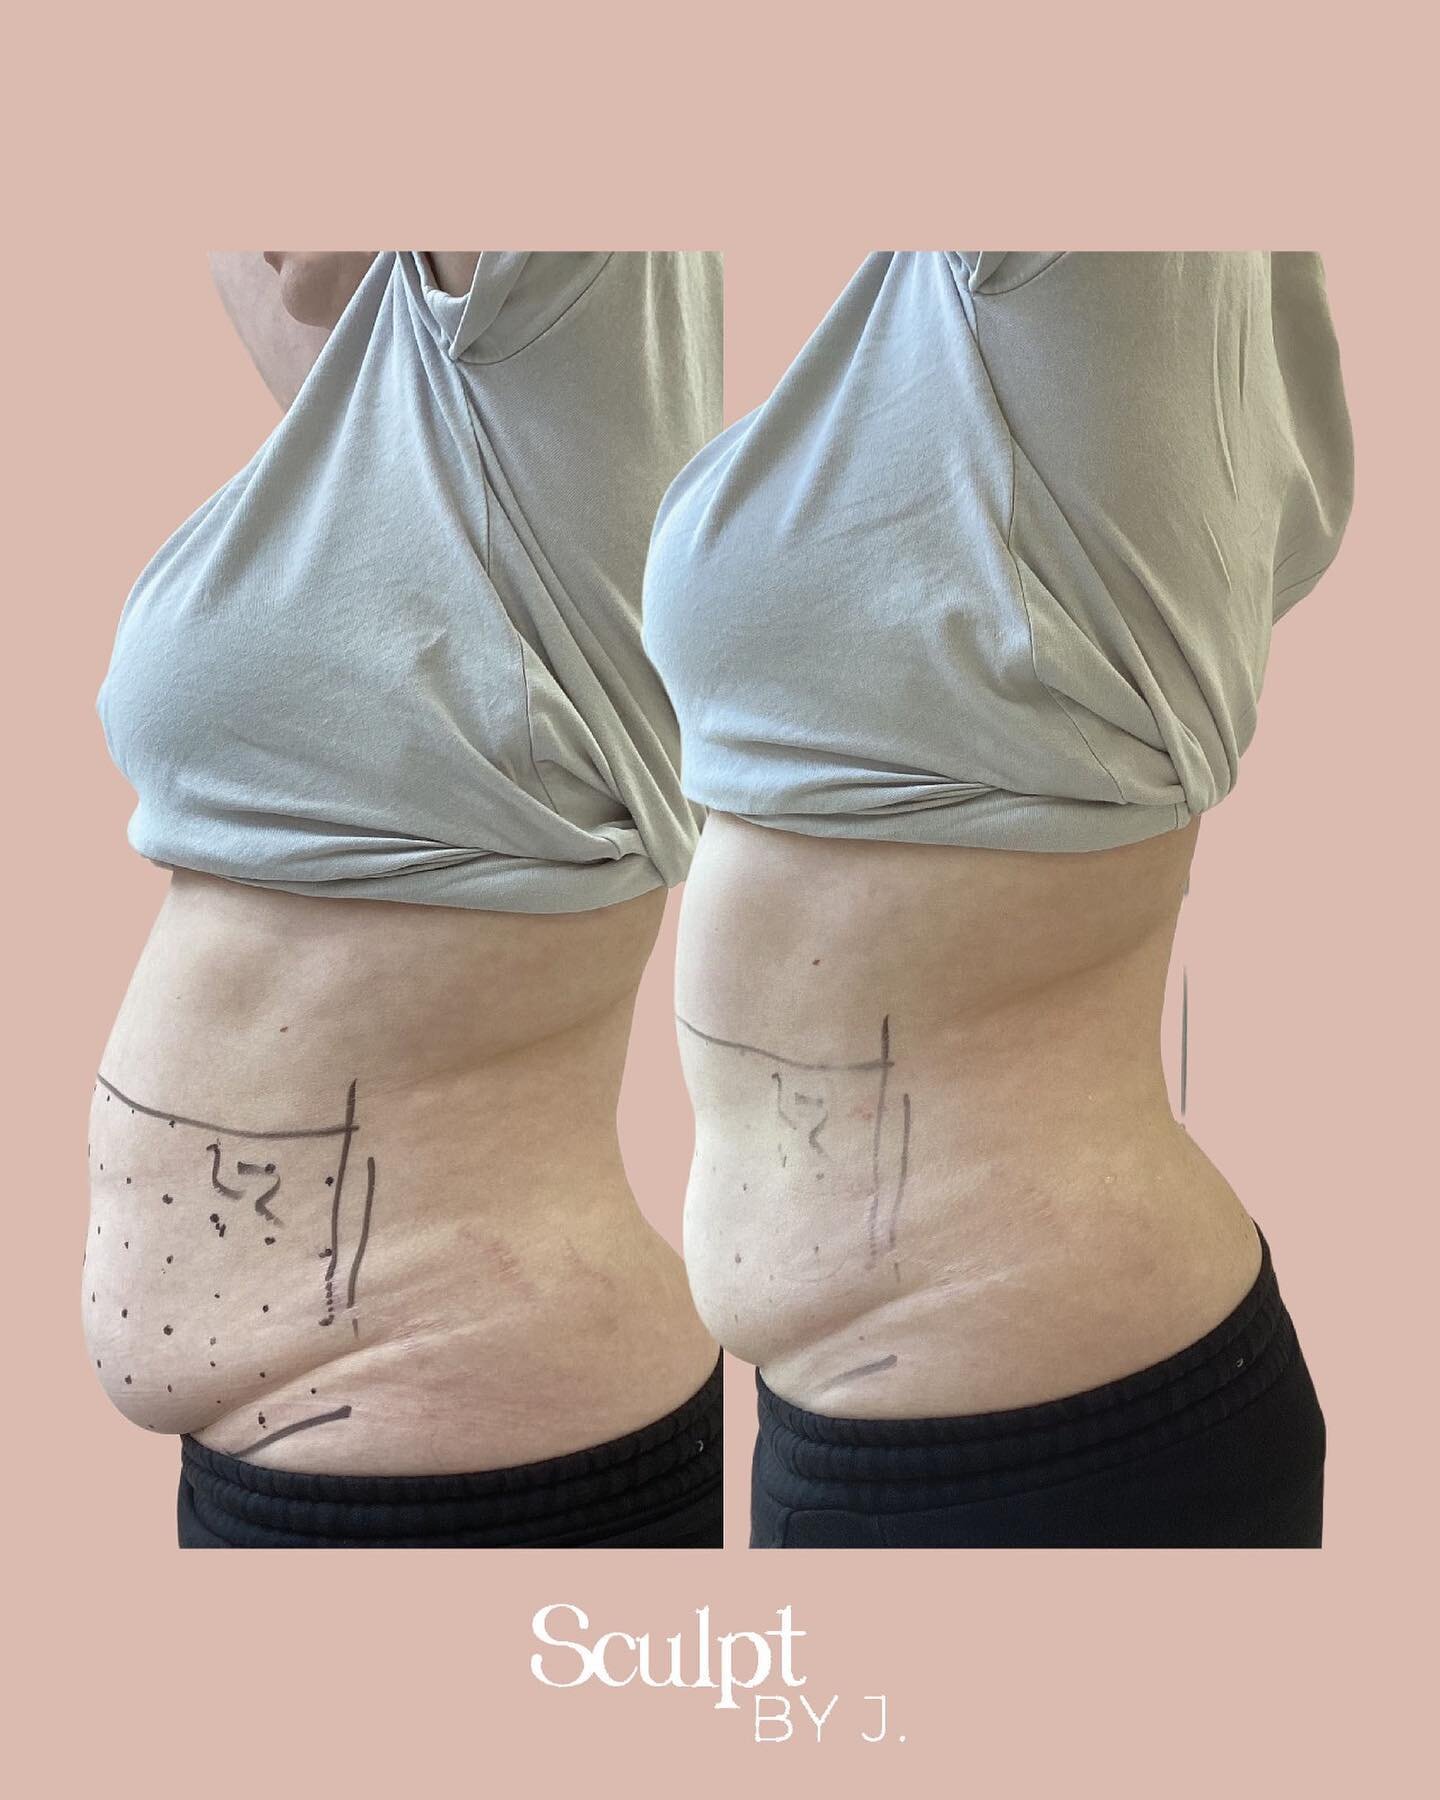 Immediately after one session of LIPOcel 😱

Generally, clients will see results from LIPOcel immediately following their treatment (around 5-15% of overall results are noticed immediately), however the full effect of the treatment will continue to d